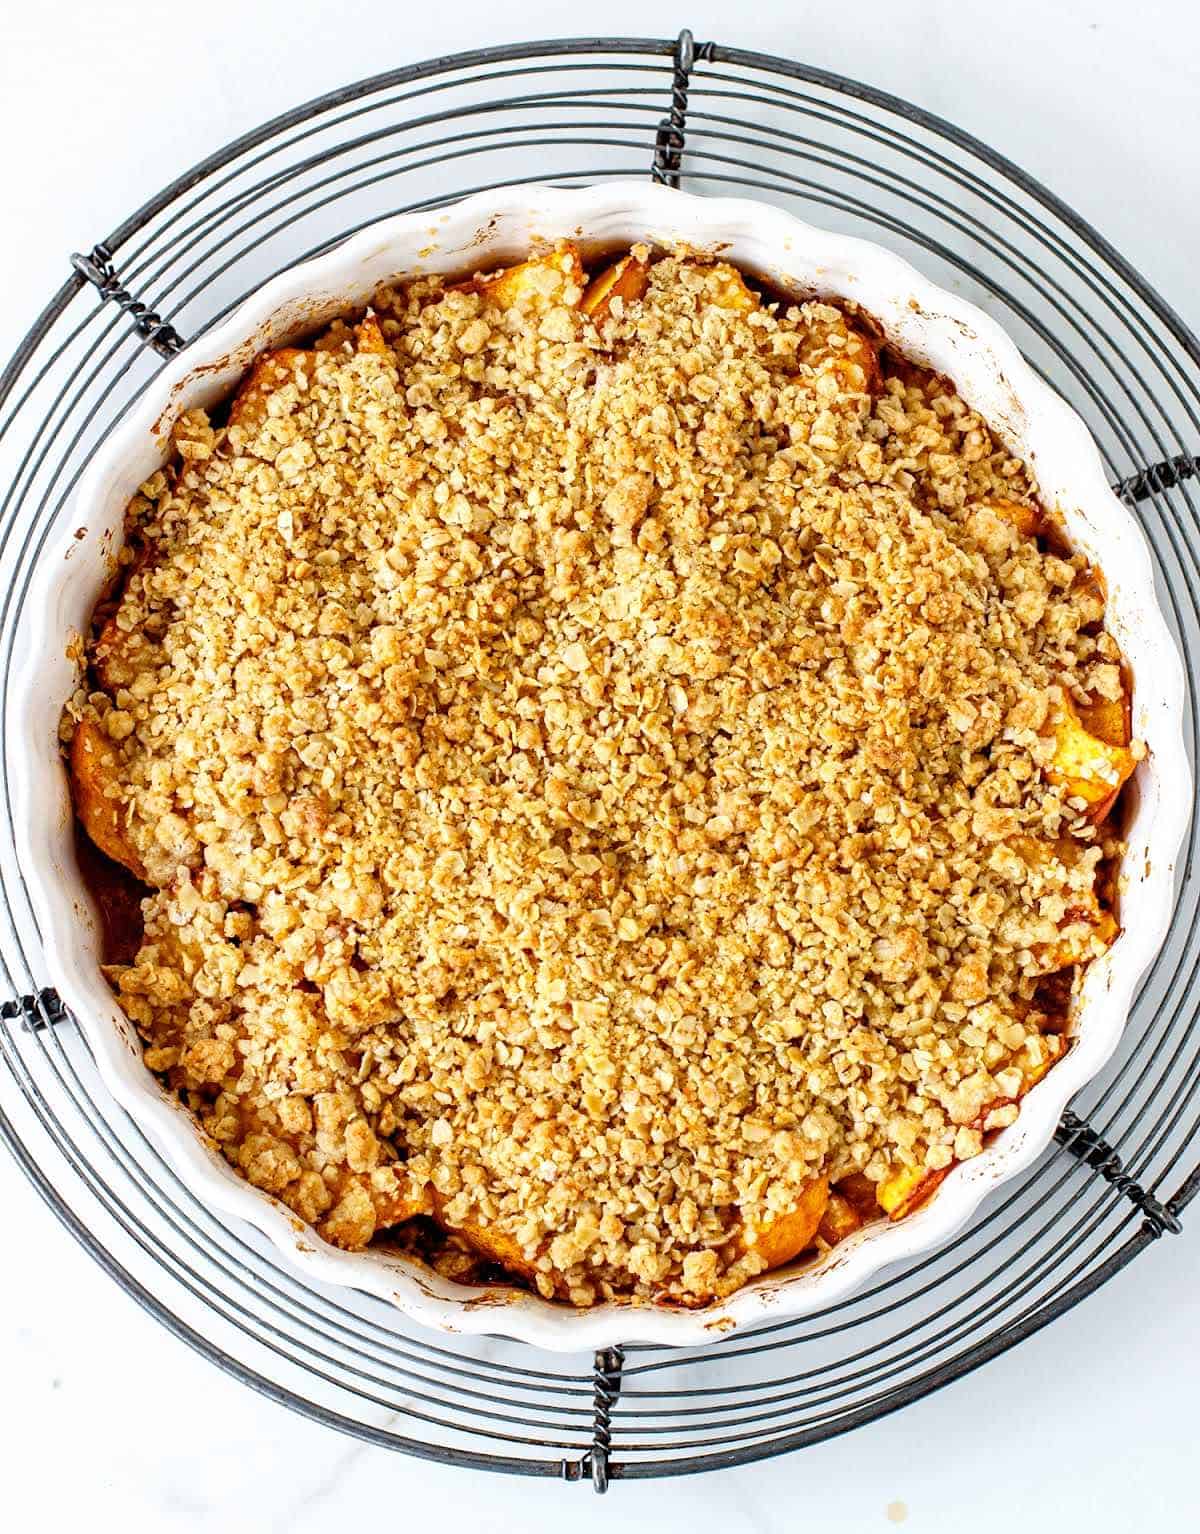 Baked peach crisp on wire rack on white surface